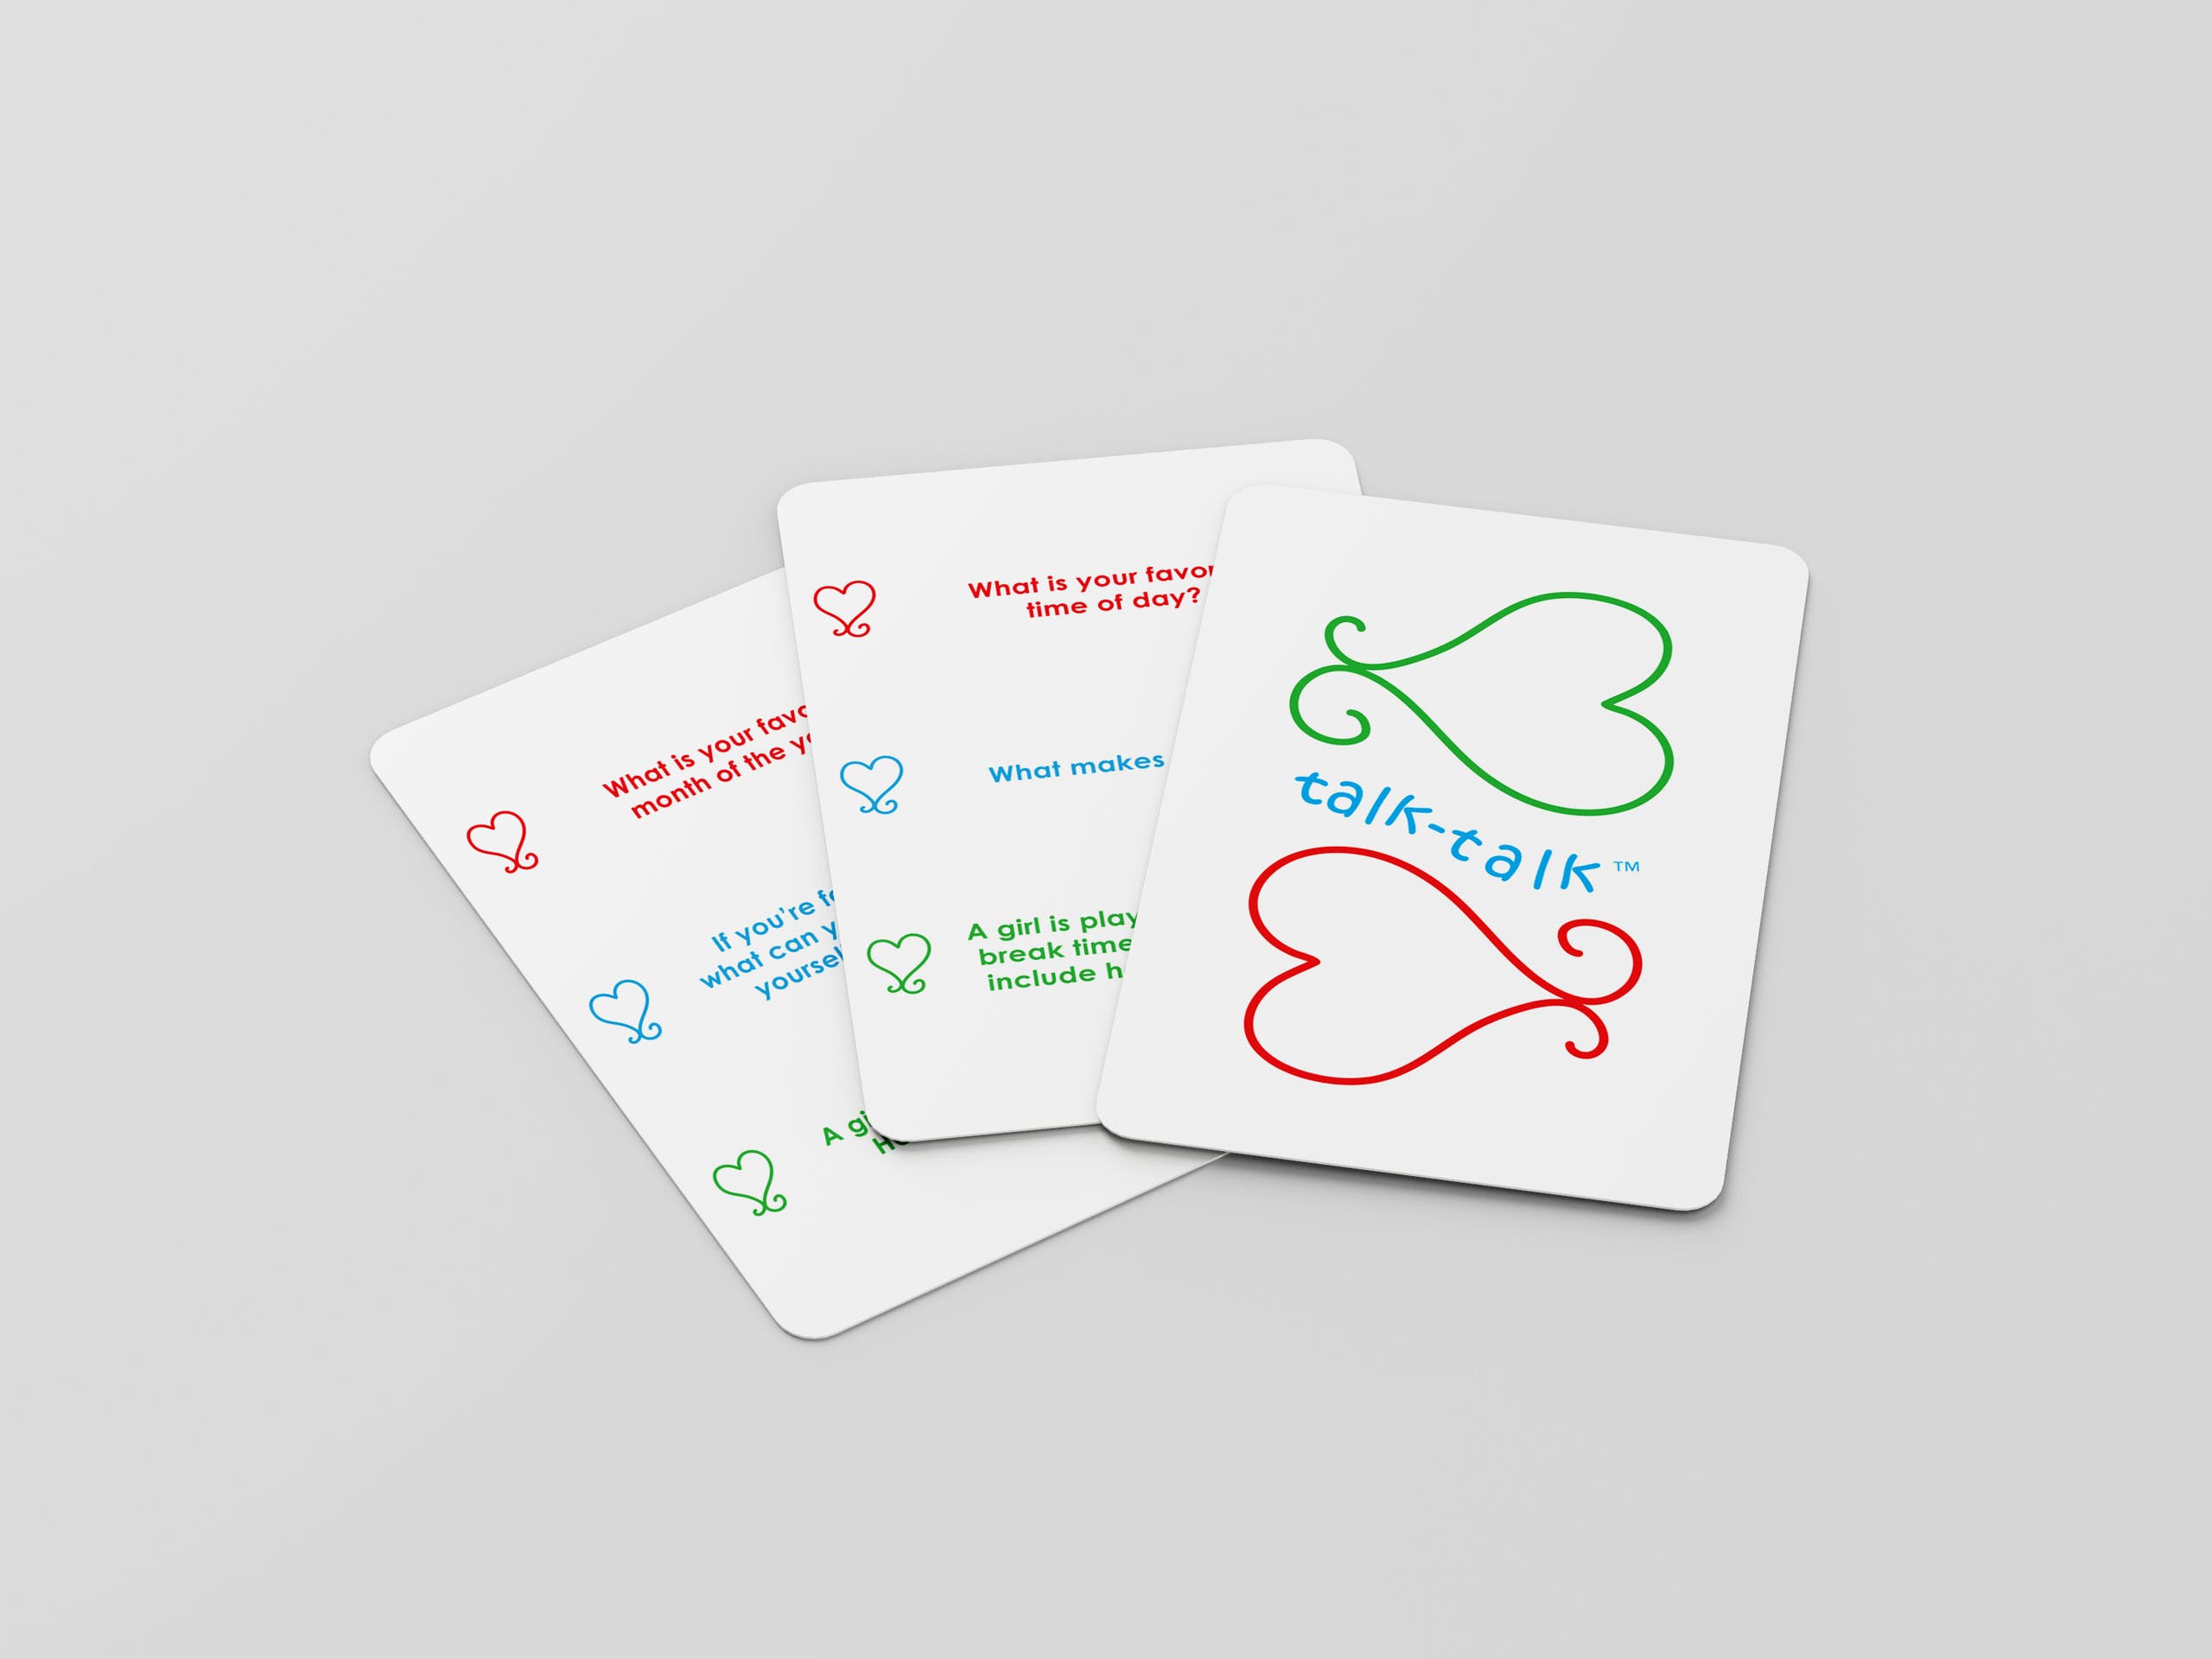 Talk-talk cards deck from the Smart Heart board game, developed by two Dubai-based psychologists to build children's emotional intelligence and address mental health issues. (Supplied)